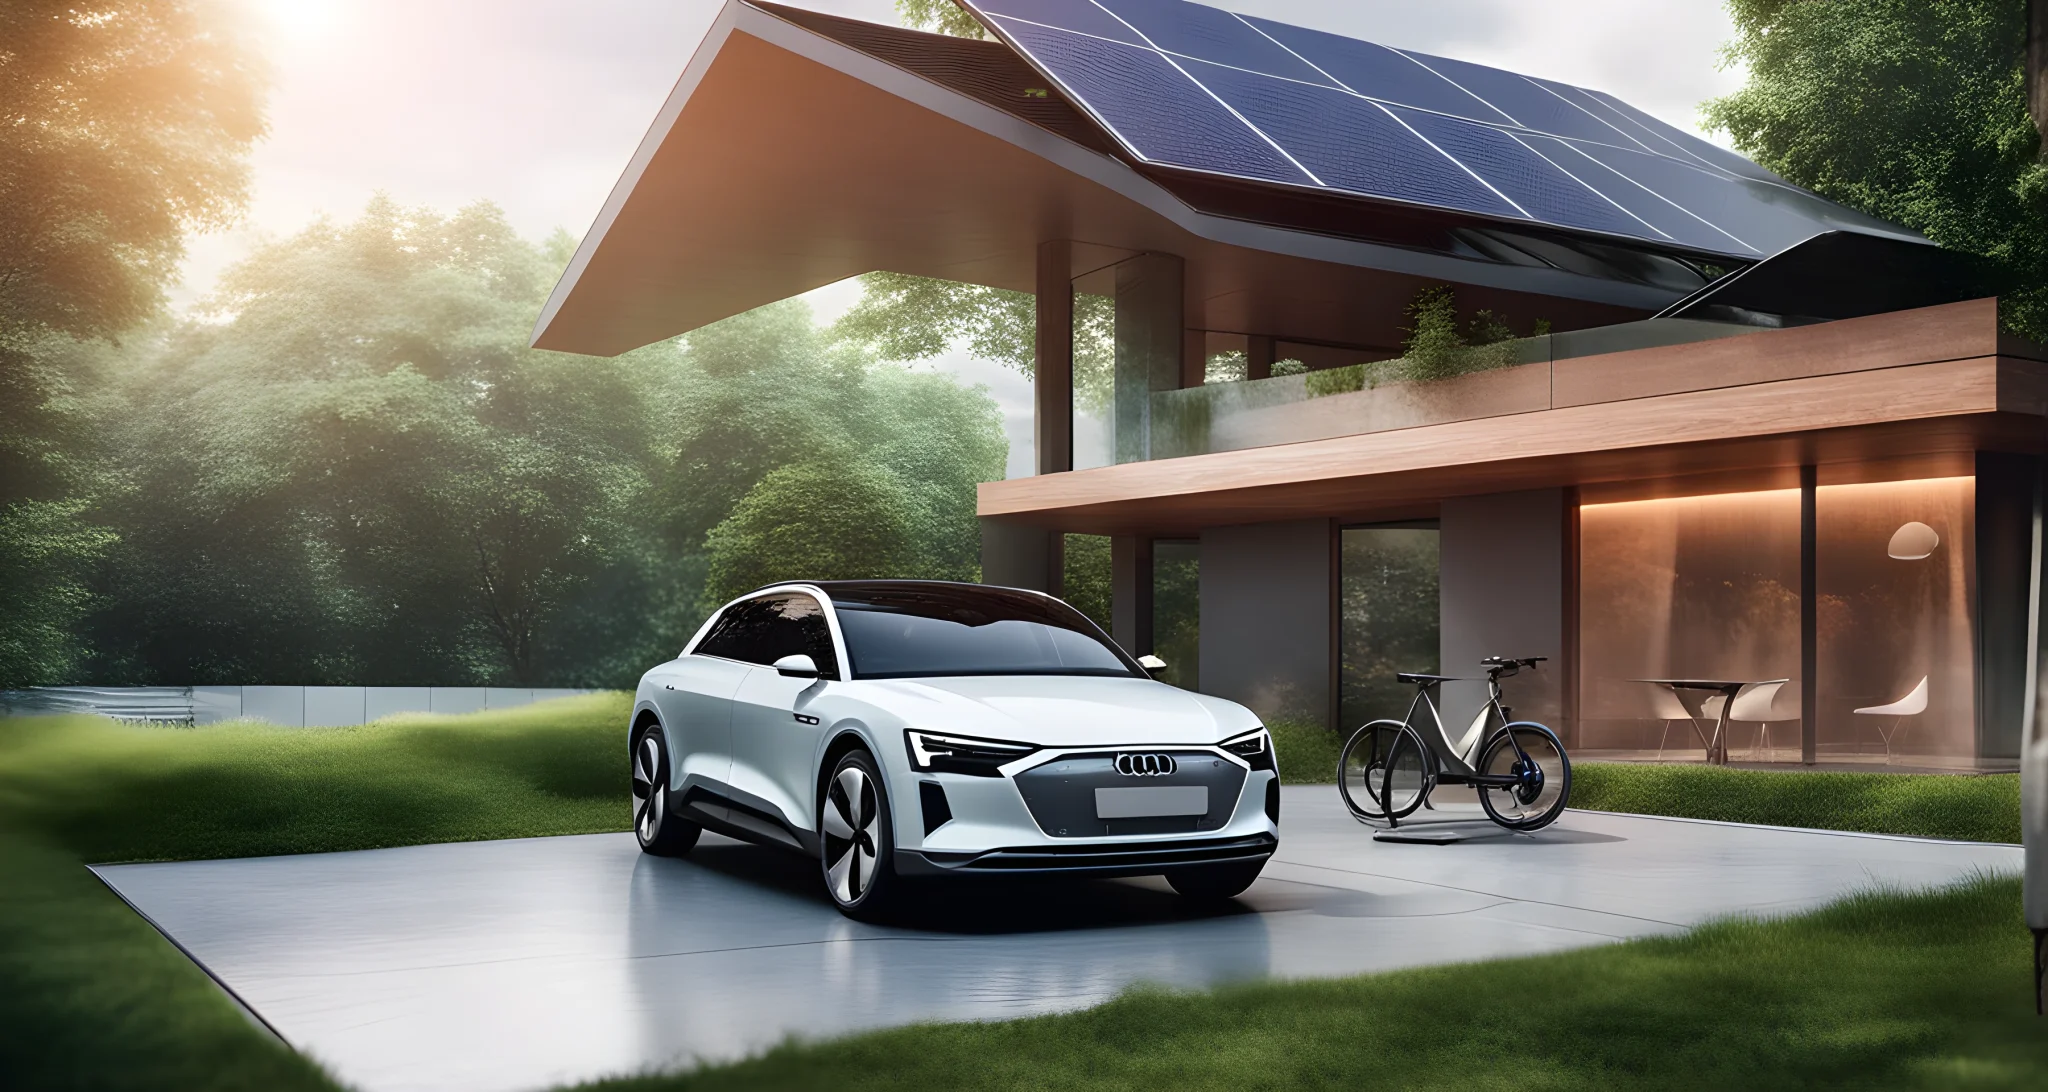 The image features a sleek, modern Audi electric car surrounded by greenery, solar panels, and a charging station.